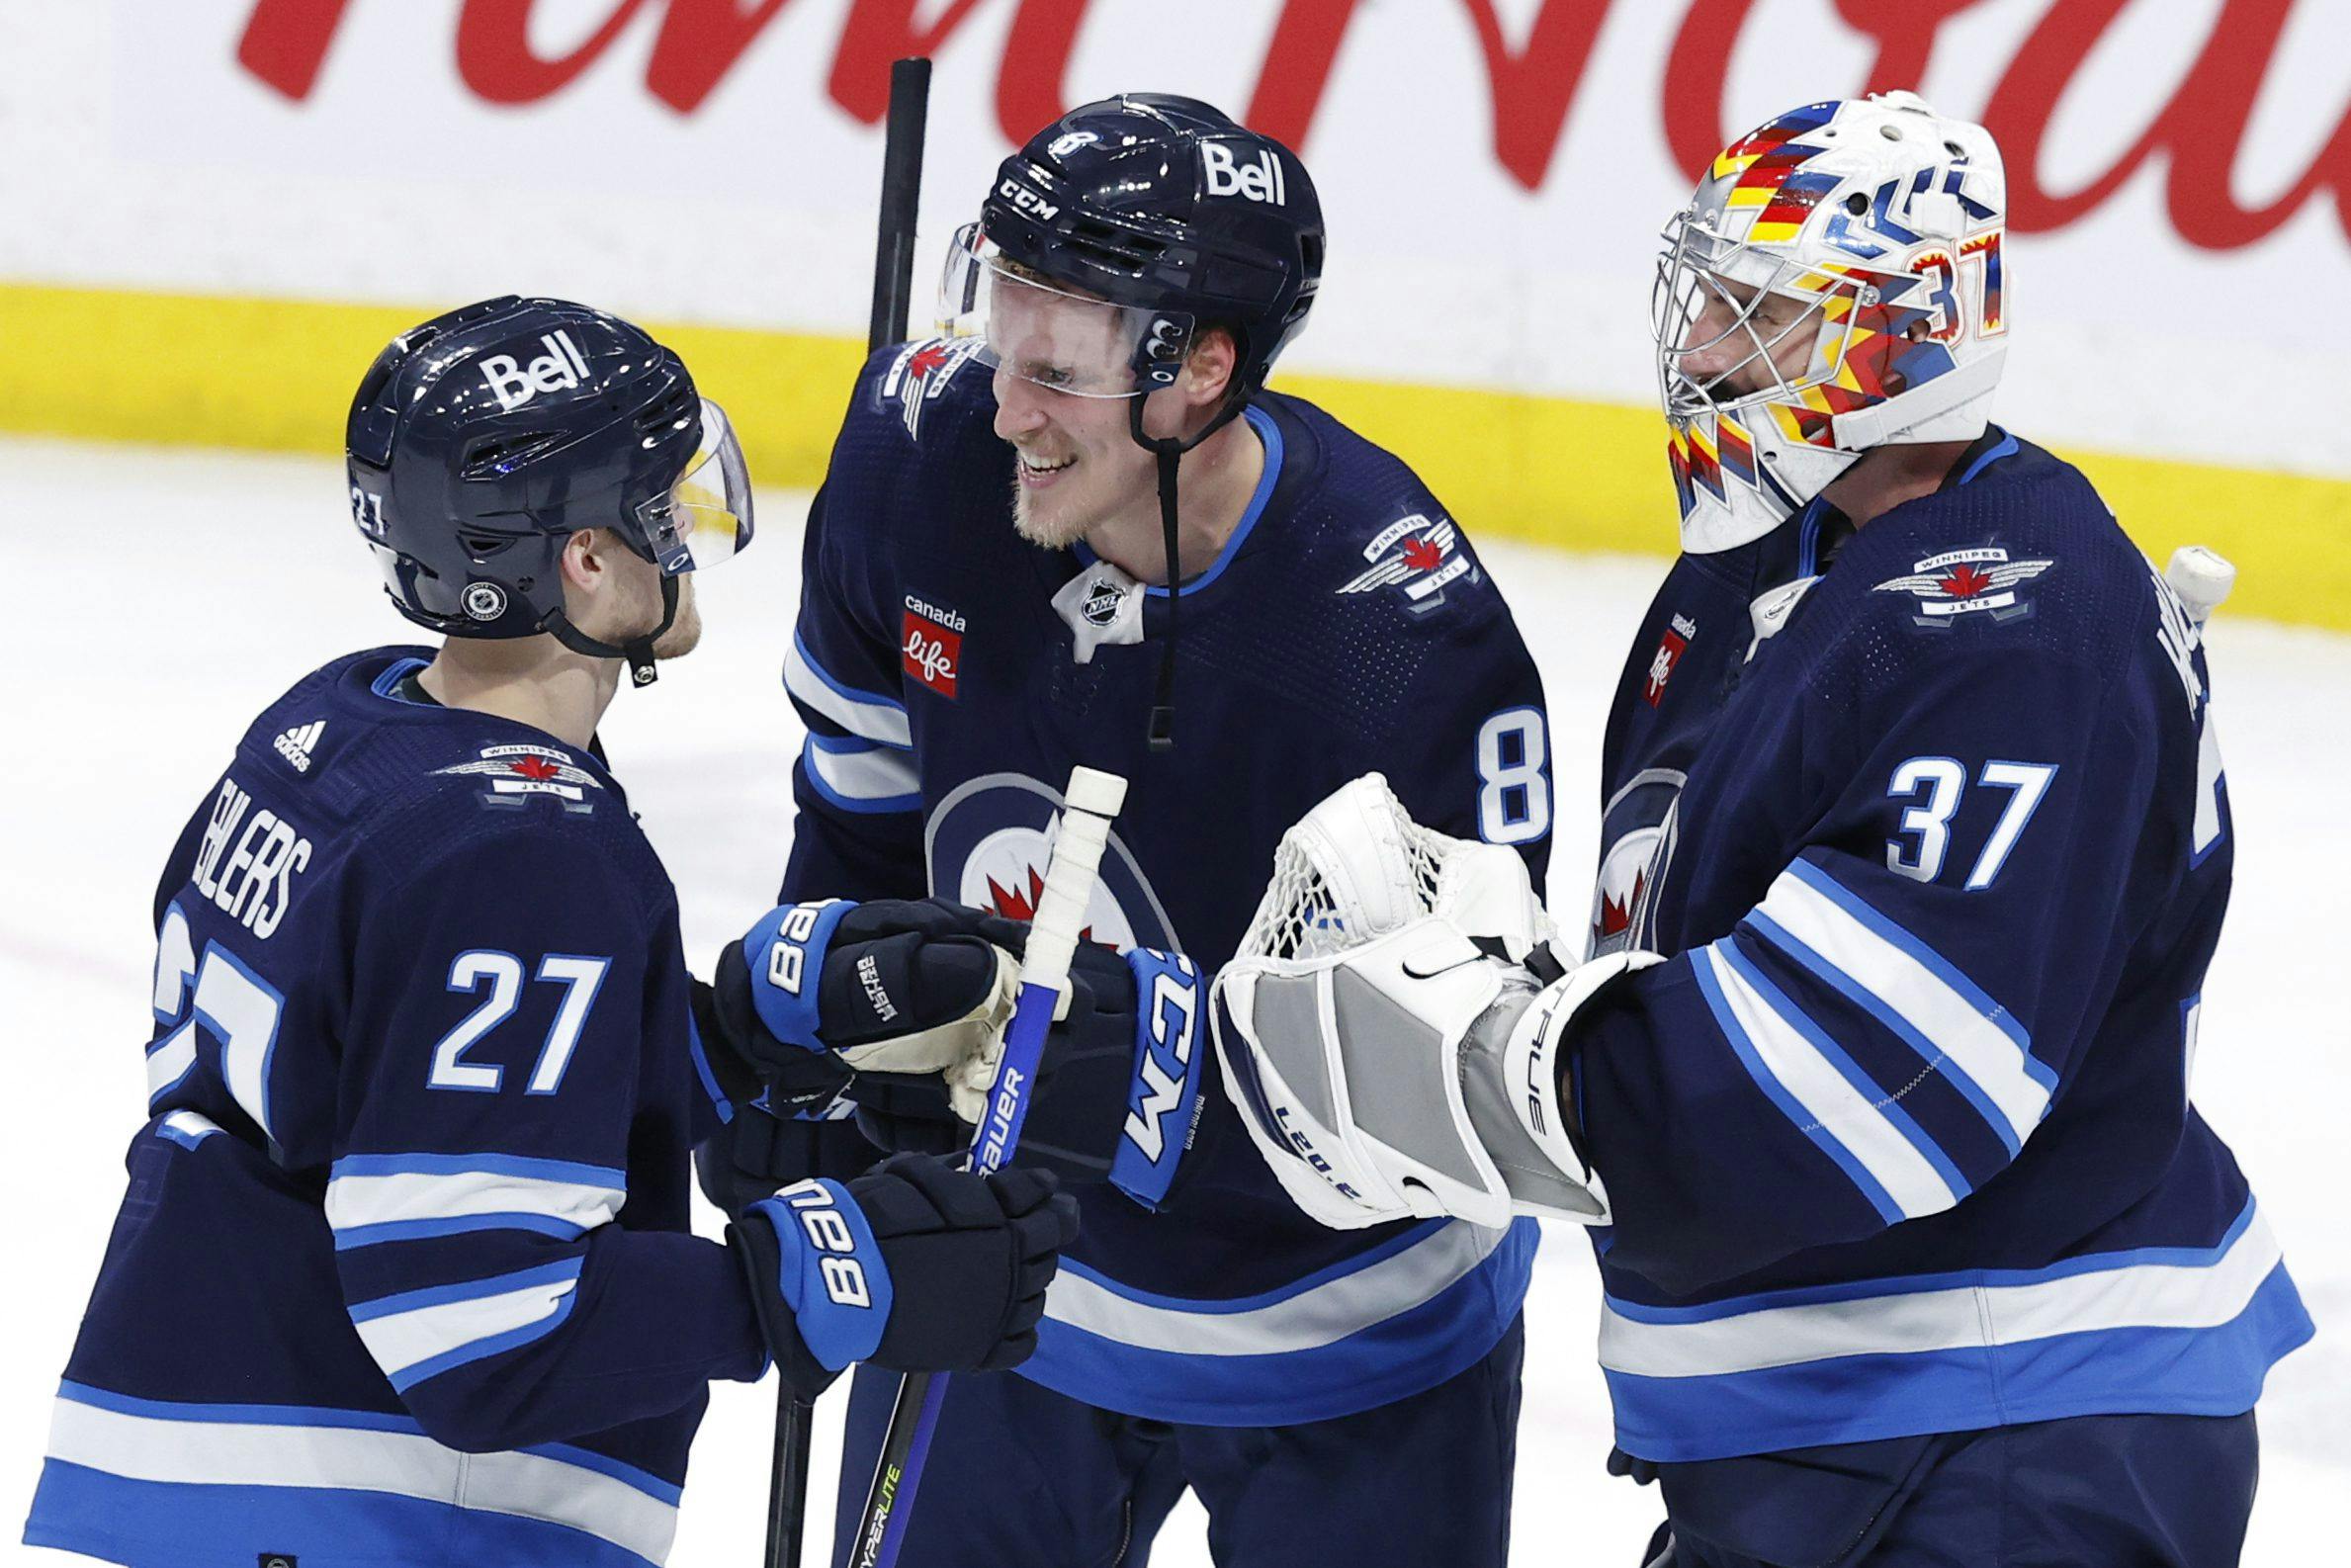 Vegas Golden Knights vs. Winnipeg Jets Stanley Cup playoff series preview and pick